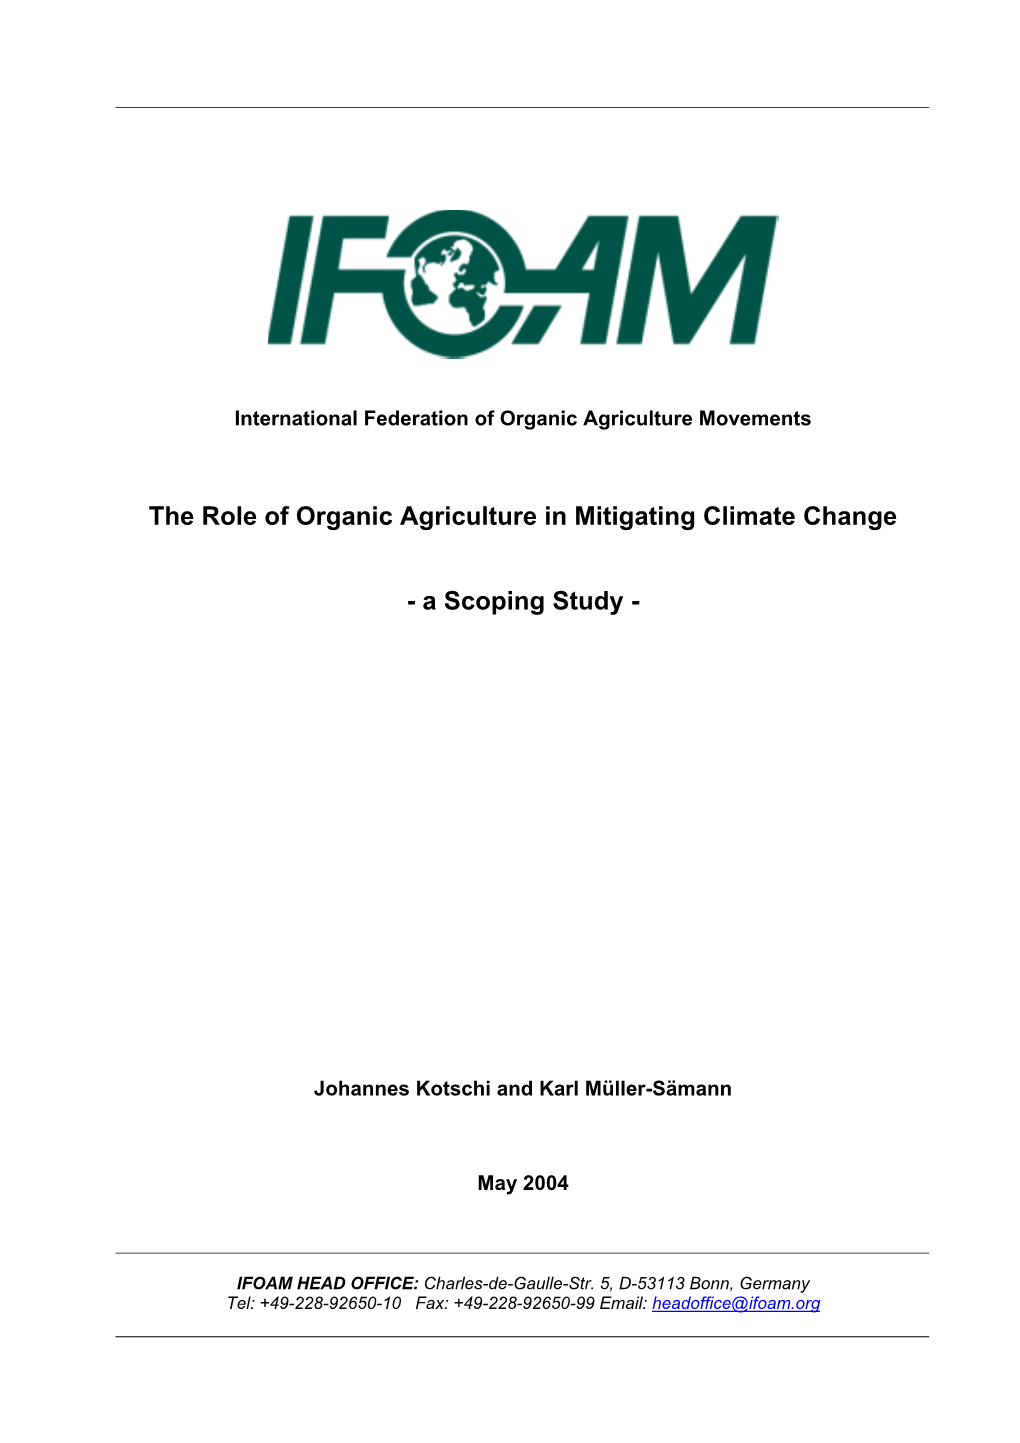 The Role of Organic Agriculture in Mitigating Climate Change